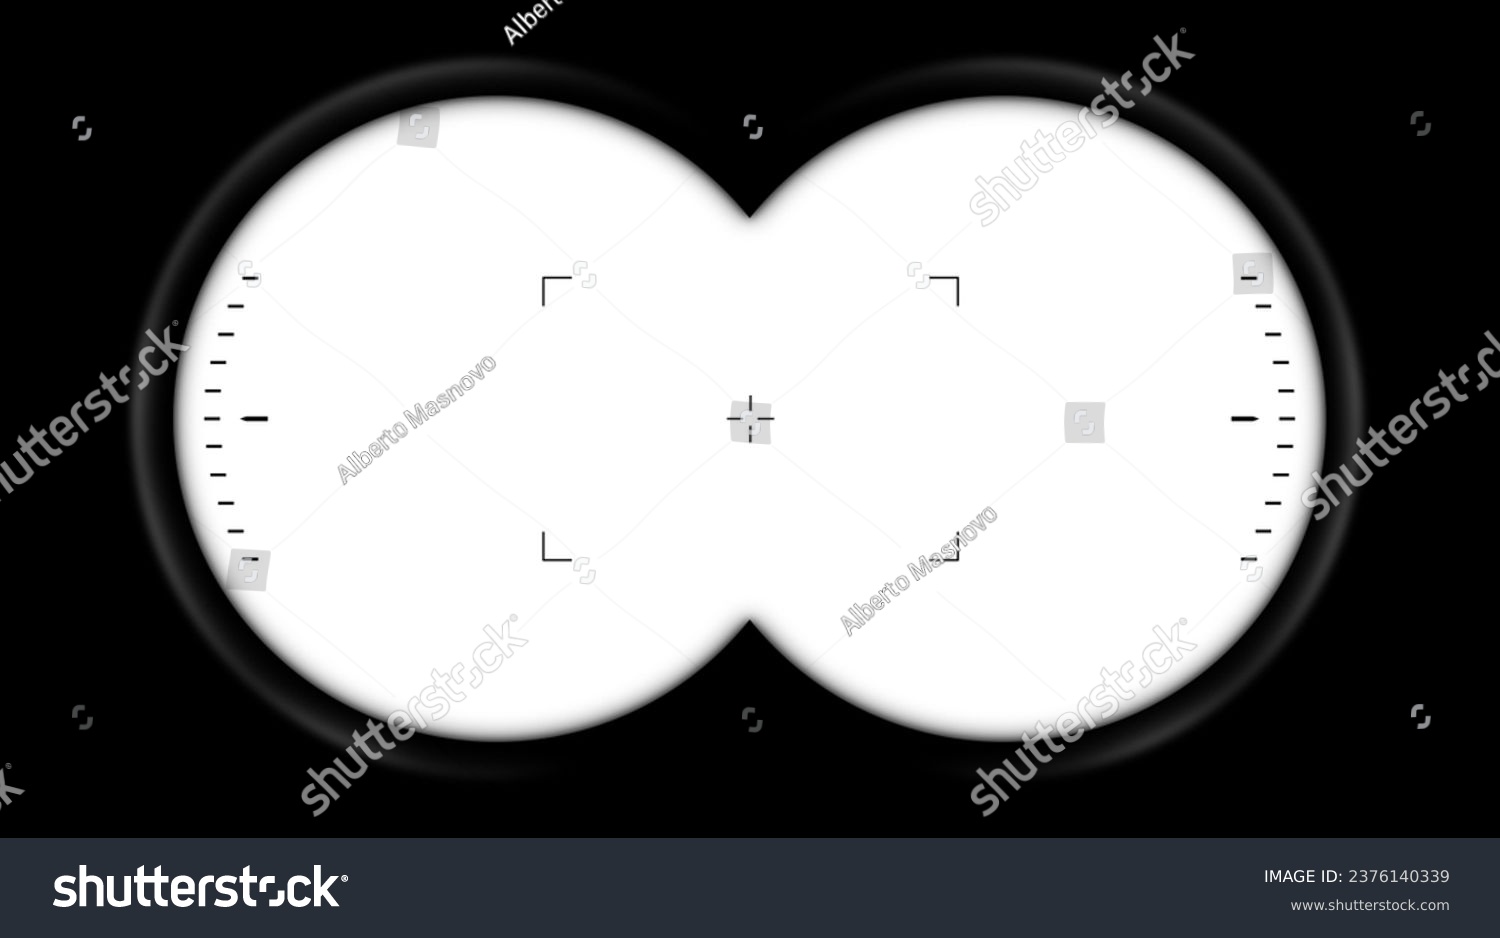 Binoculars point of view with viewfinder (looking through binoculars) isolated on white background, template for your landscapes. #2376140339